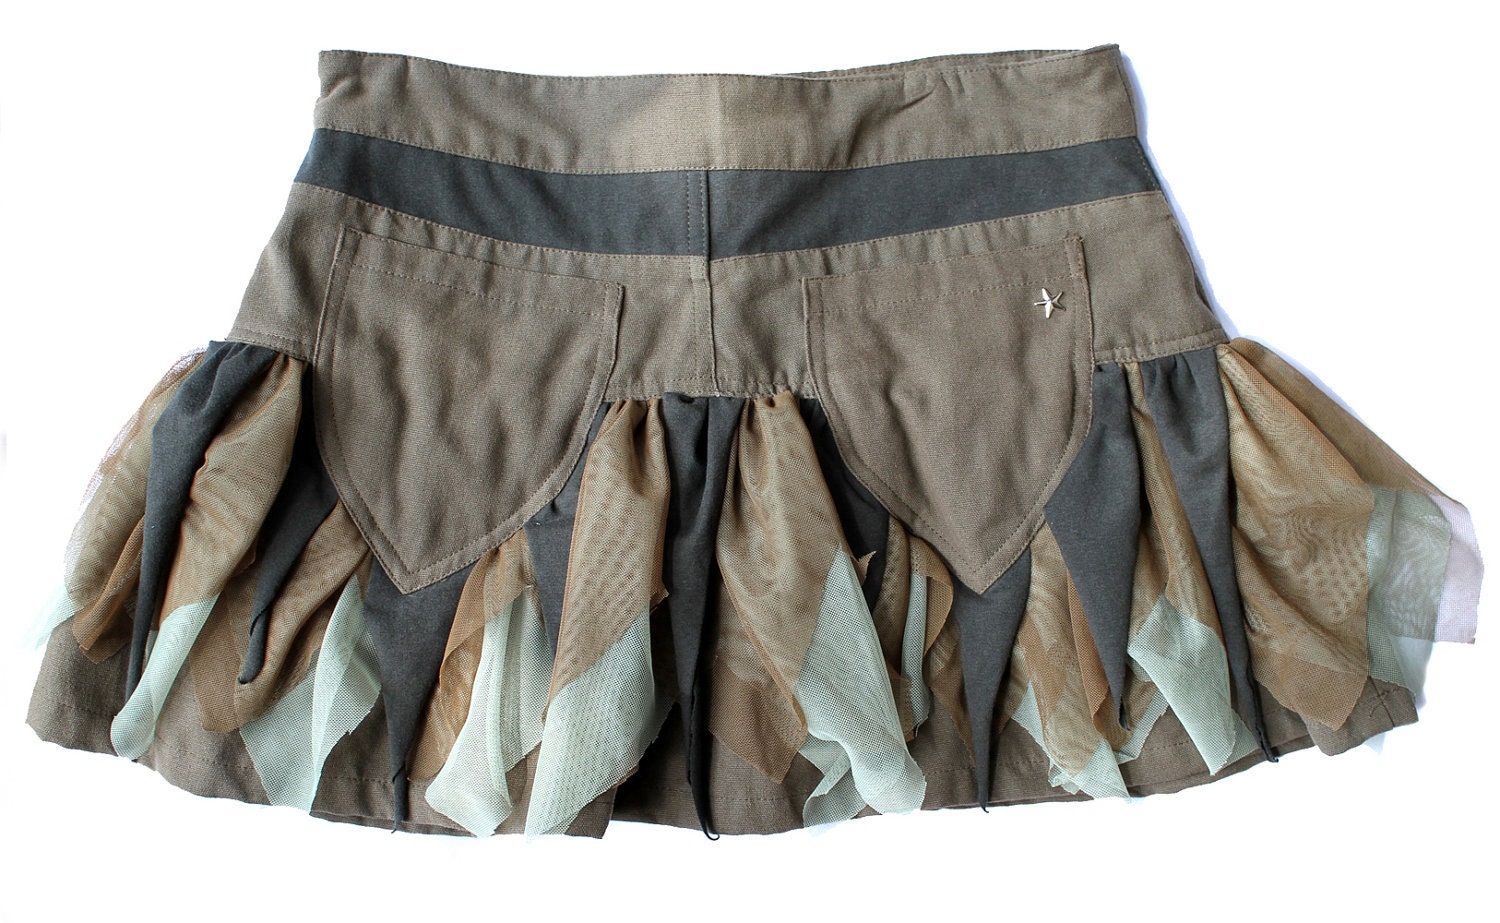 Short pixie skirt - natural greens and brown - size L